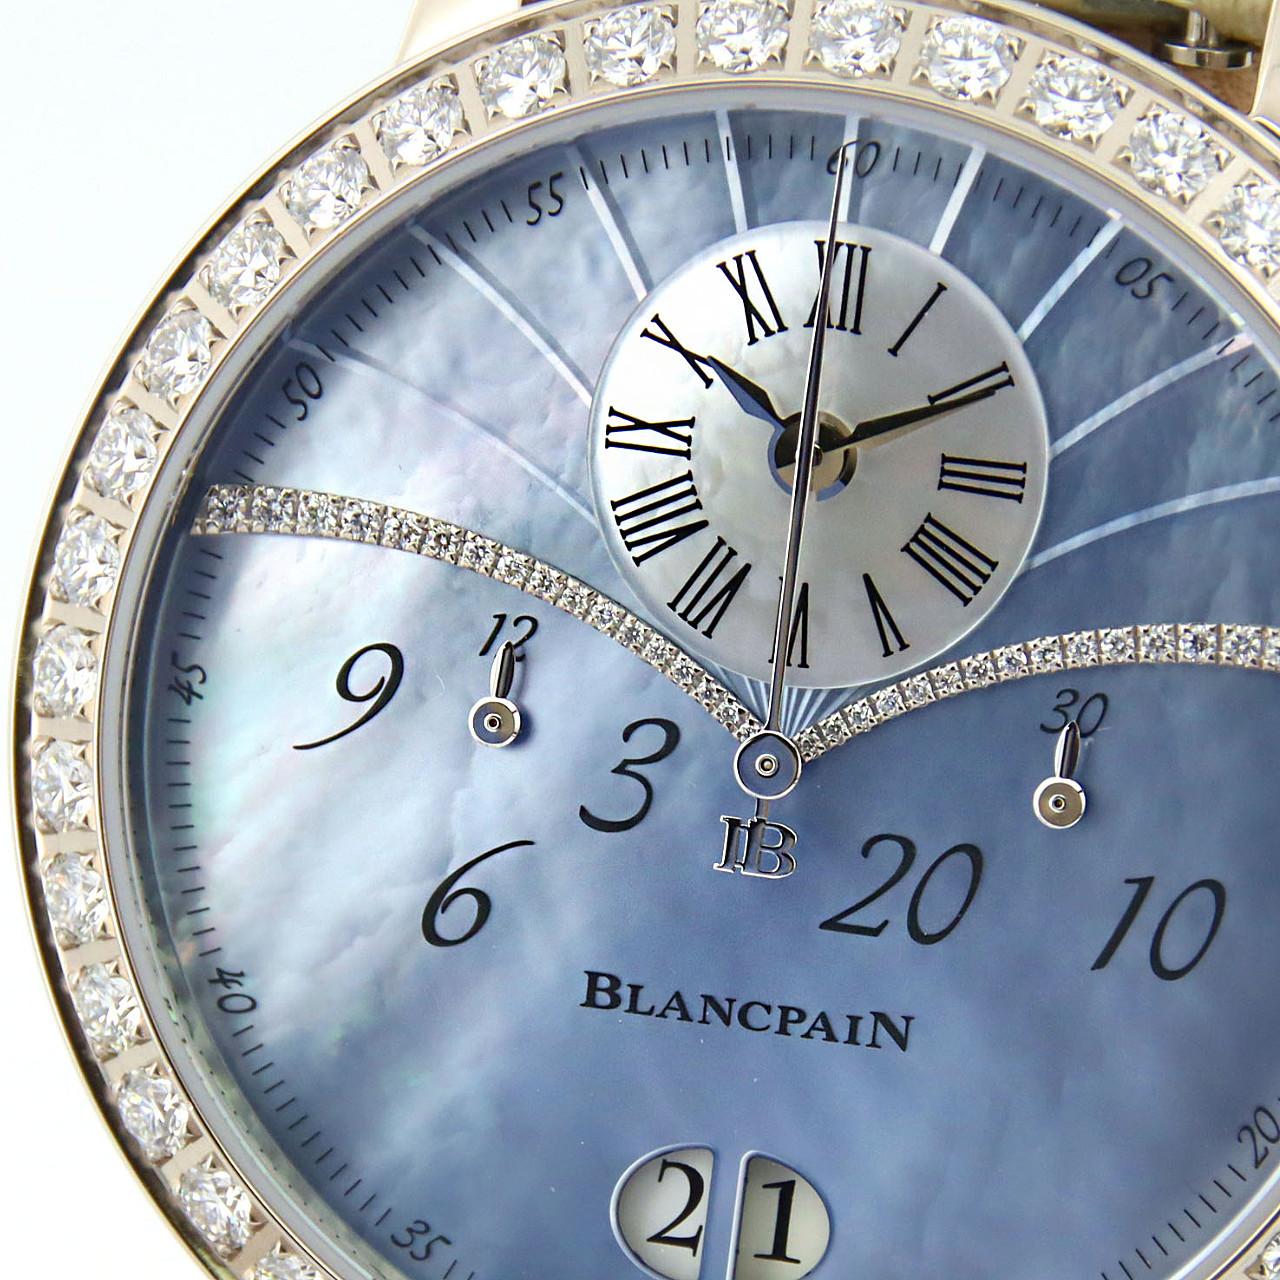 Blancpain Woman Flyback Chronograph Large Date WG/D 3626-1954L-58A WG Automatic